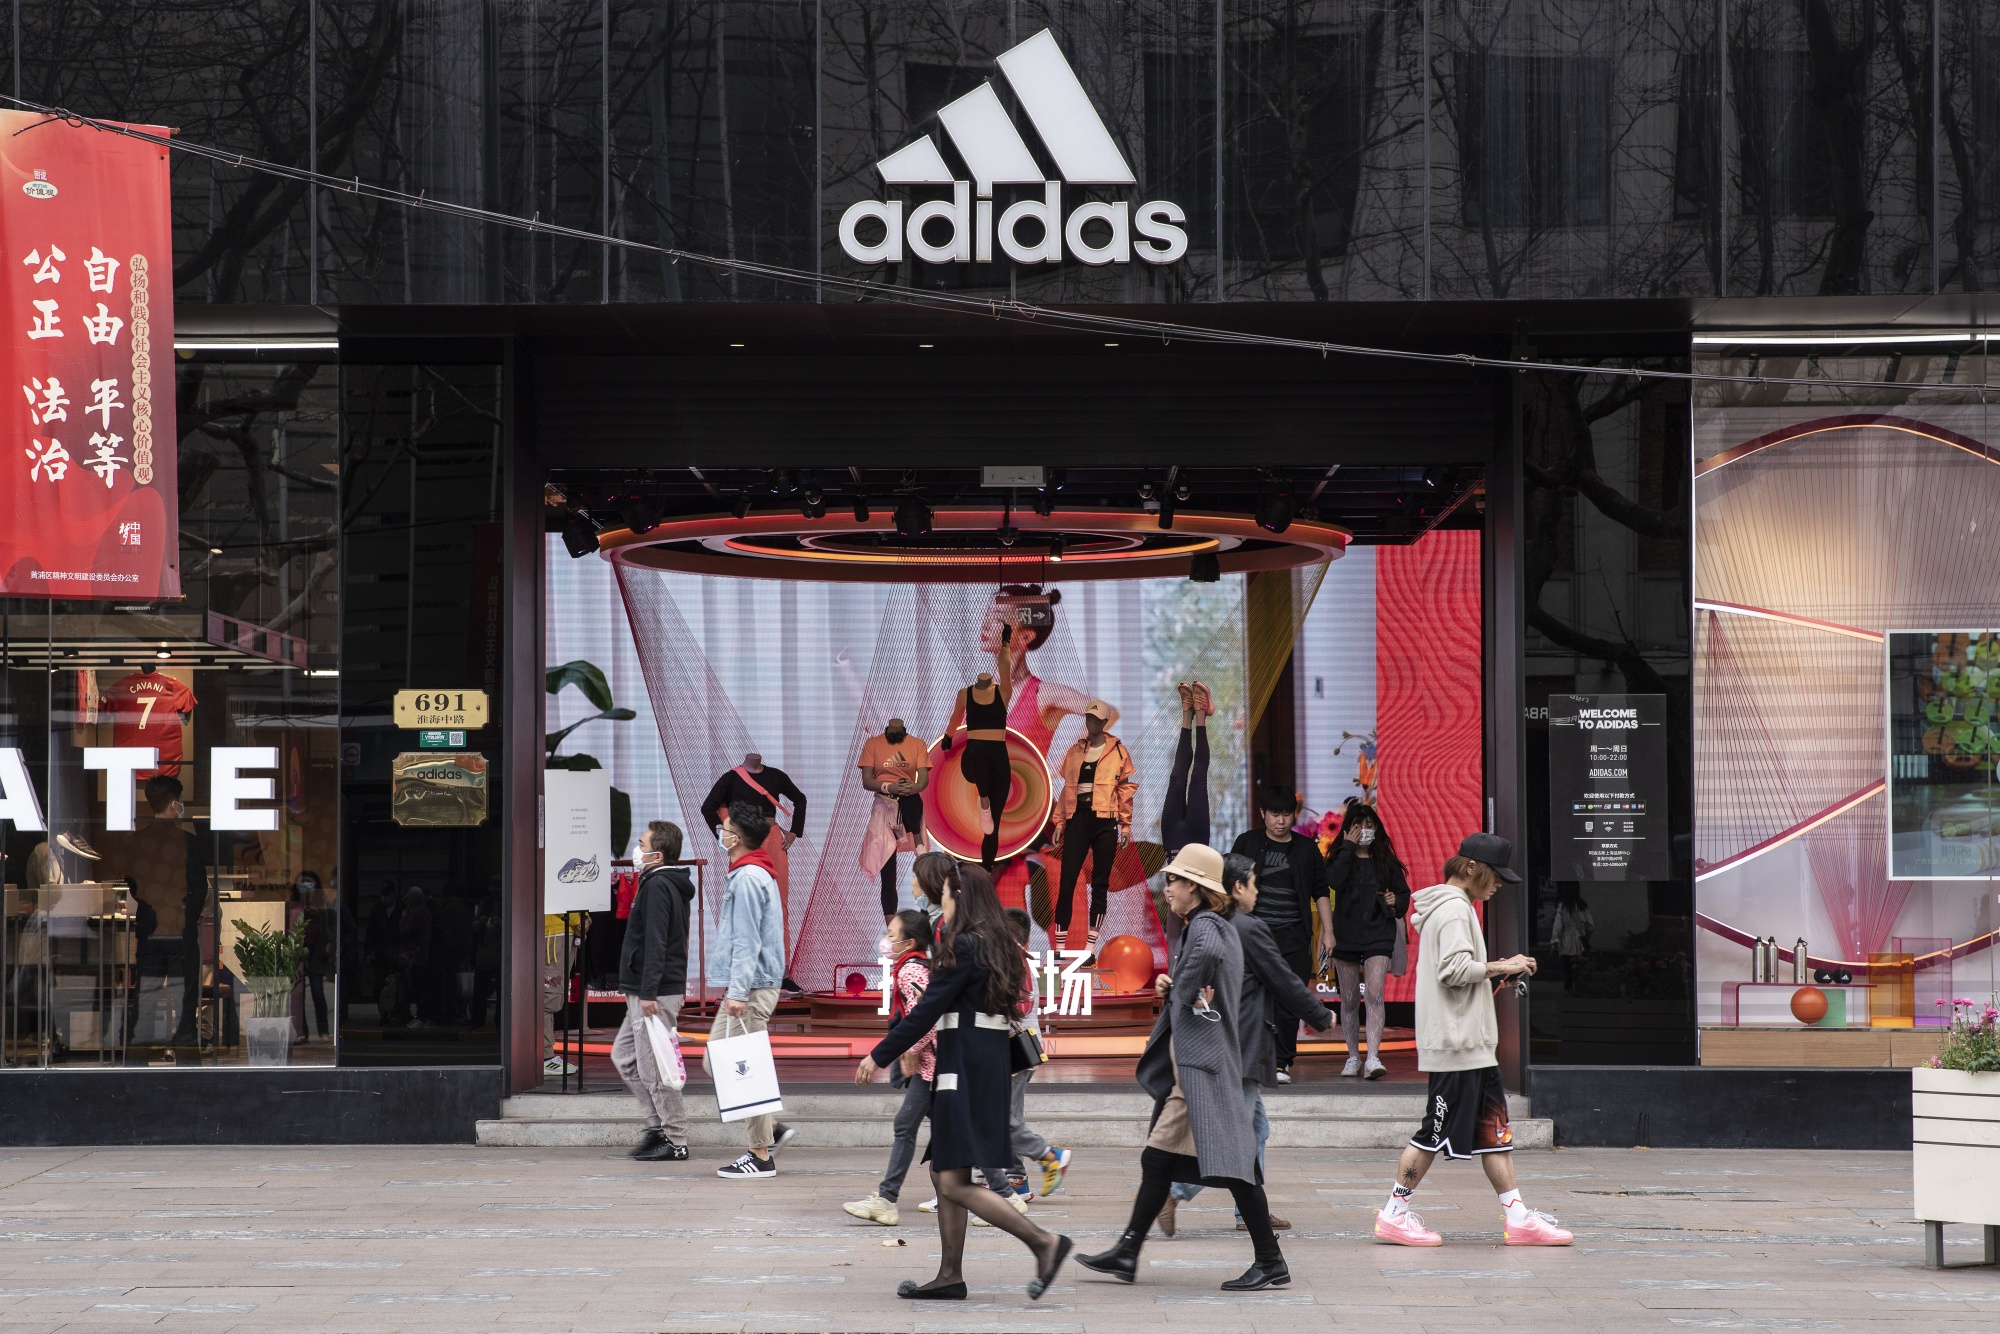 Adidas as Production Outweigh Rebound in Sales - Bloomberg